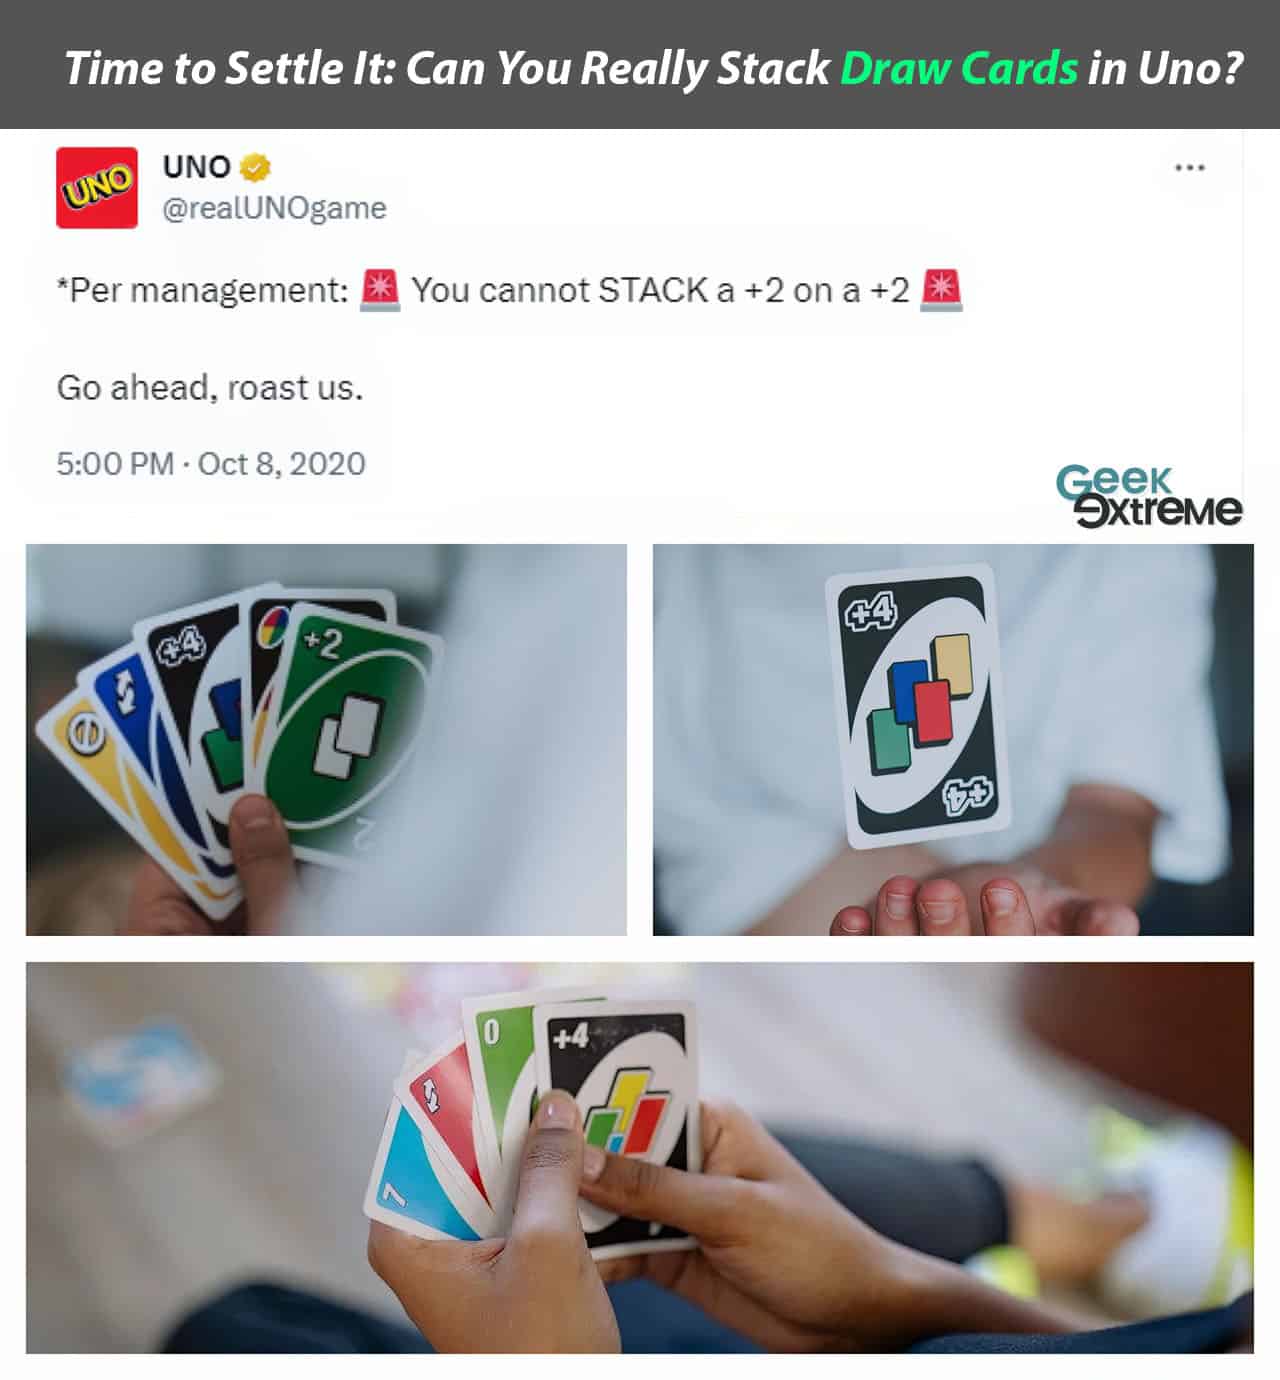 How To Play Spicy UNO - These Fun UNO Card Game Rules Will Spice Up Your  Next Family Game Night!